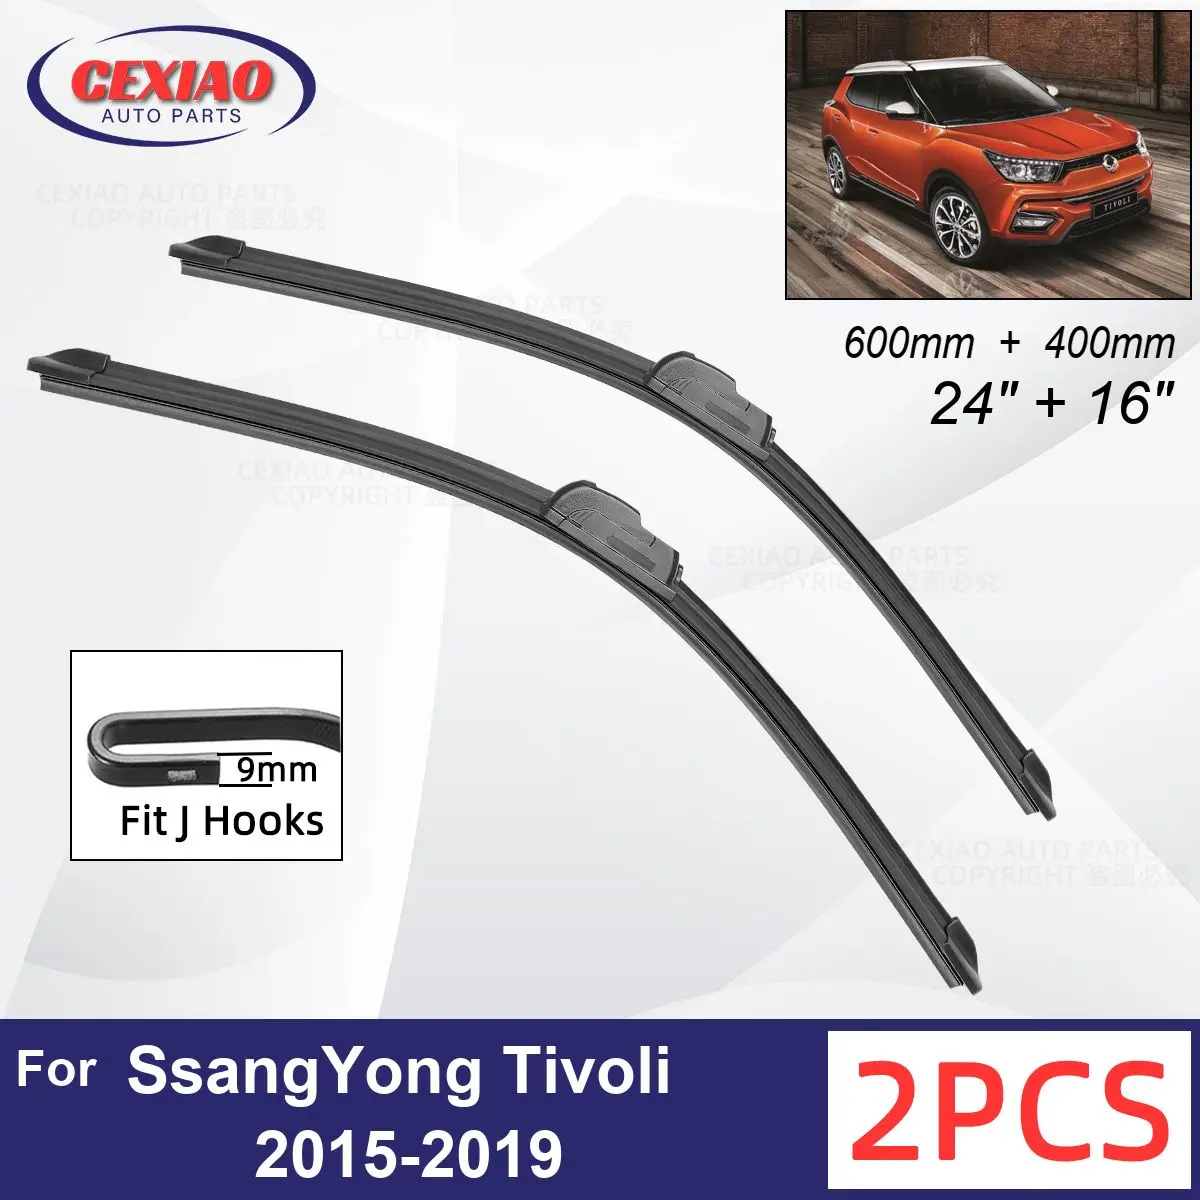 

Car Wiper For SsangYong Tivoli 2015-2019 Front Wiper Blades Soft Rubber Windscreen Wipers Auto Windshield 24"+16" 600mm + 400mm